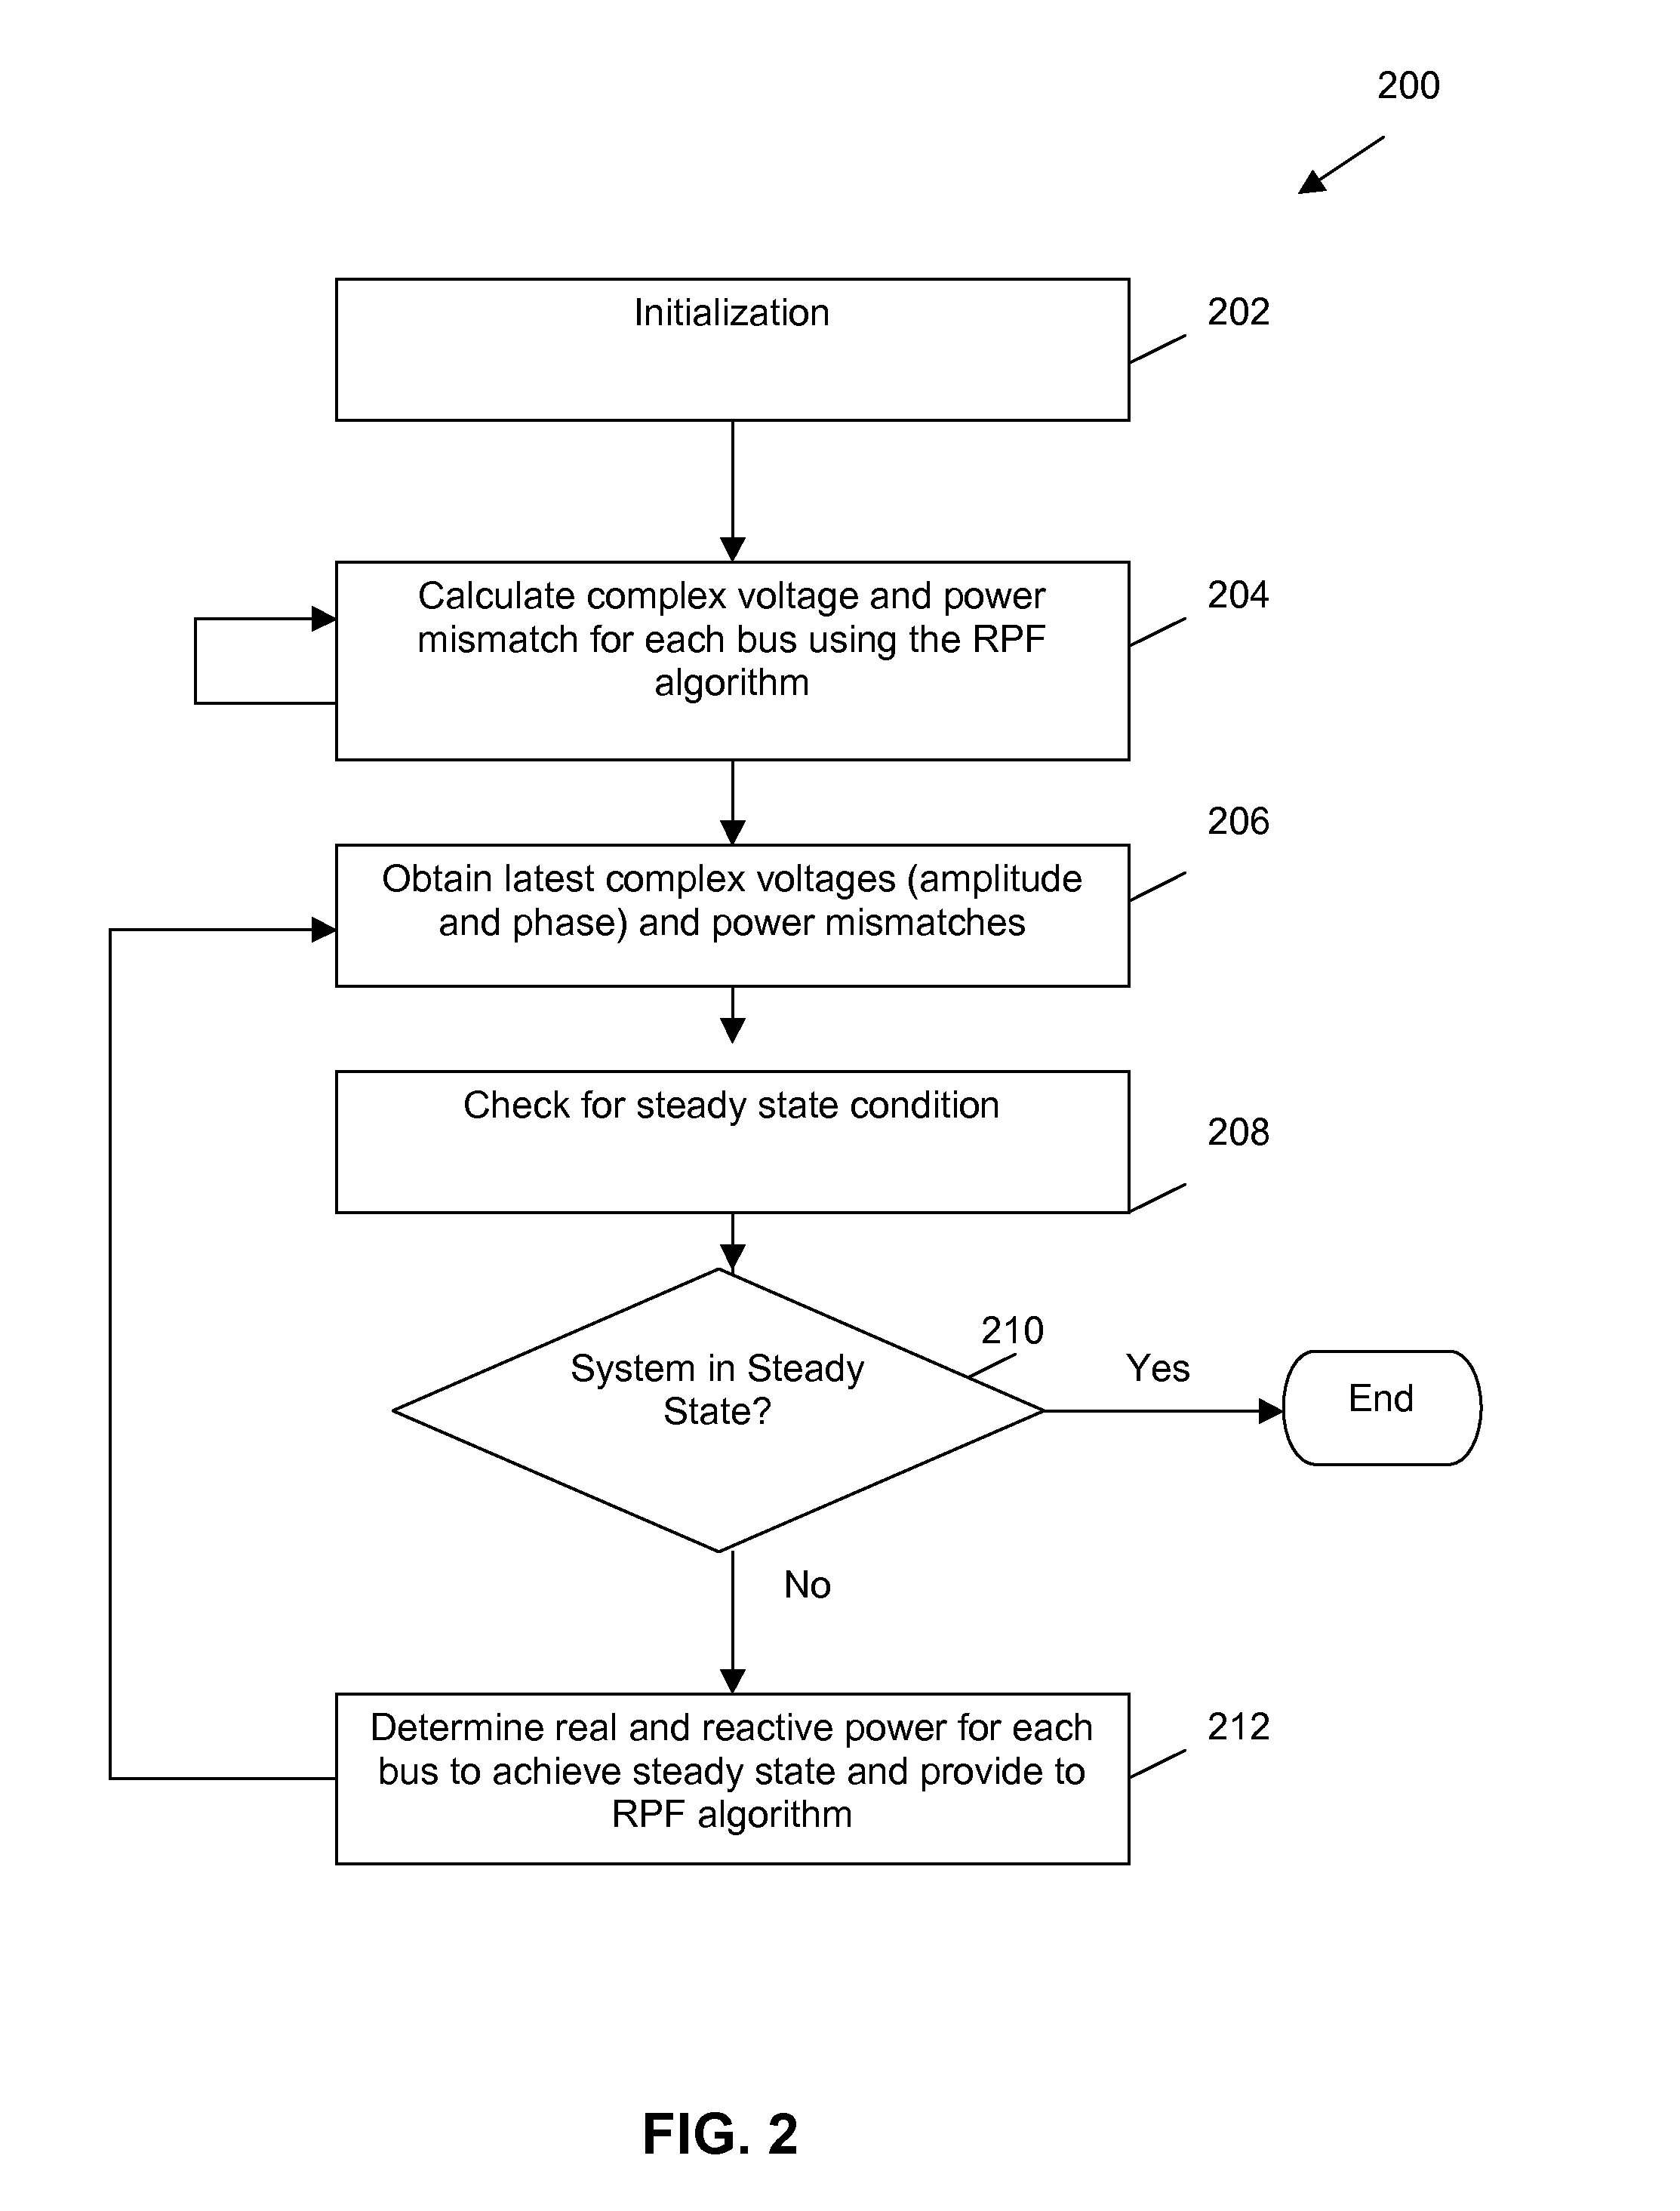 Apparatus, methods and systems for parallel power flow calculation and power system simulation